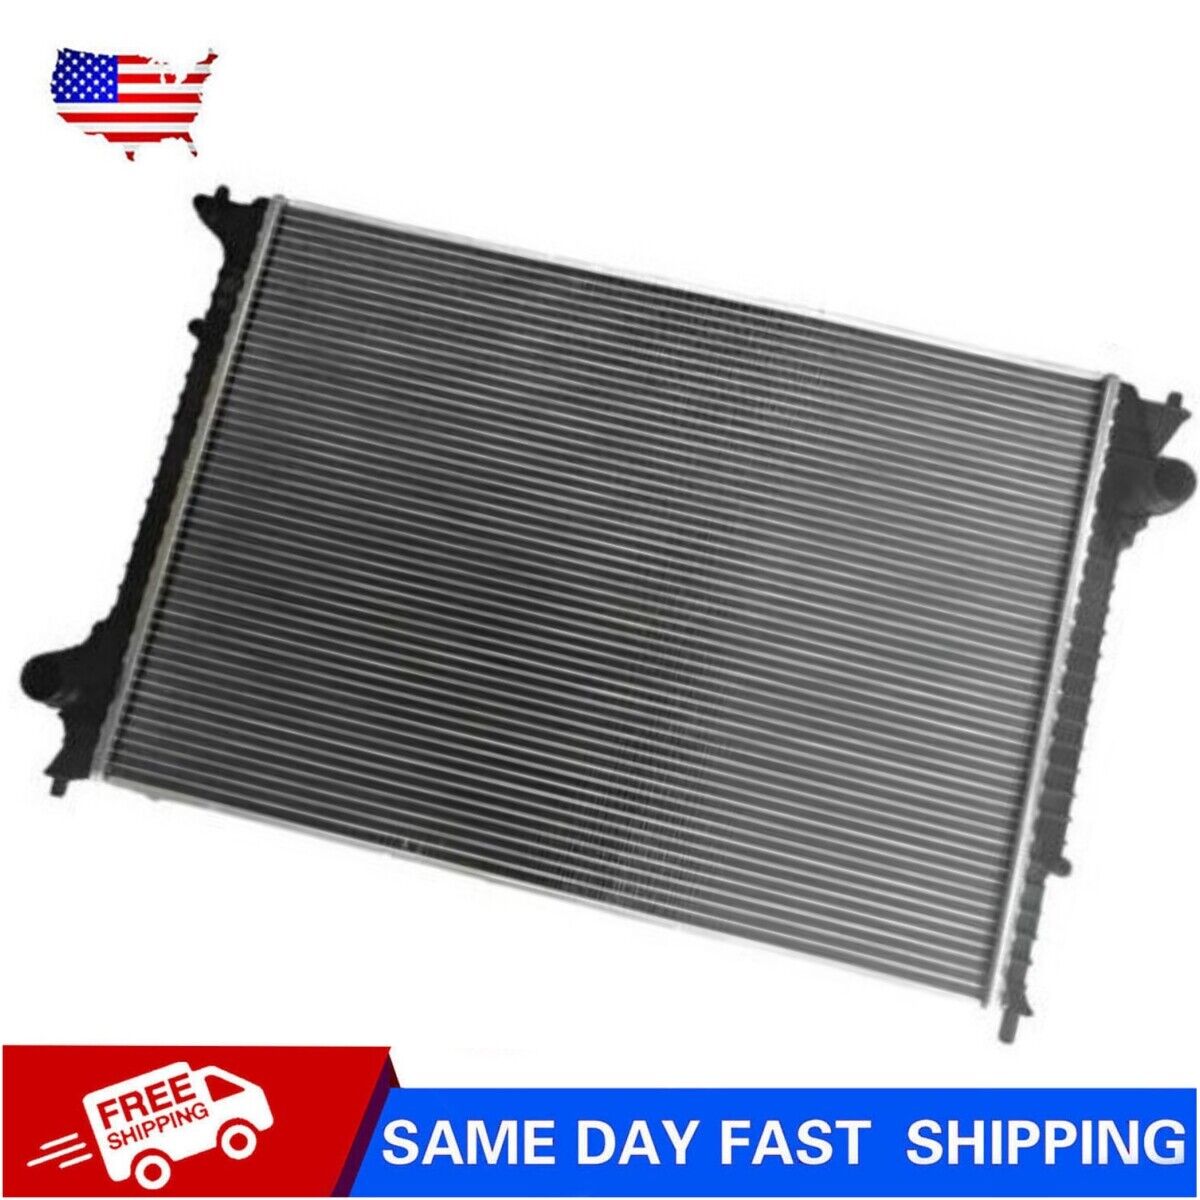 3W0198115 Coolant radiator 2004-2011 For Bentley Continental GTC & Flying Spur